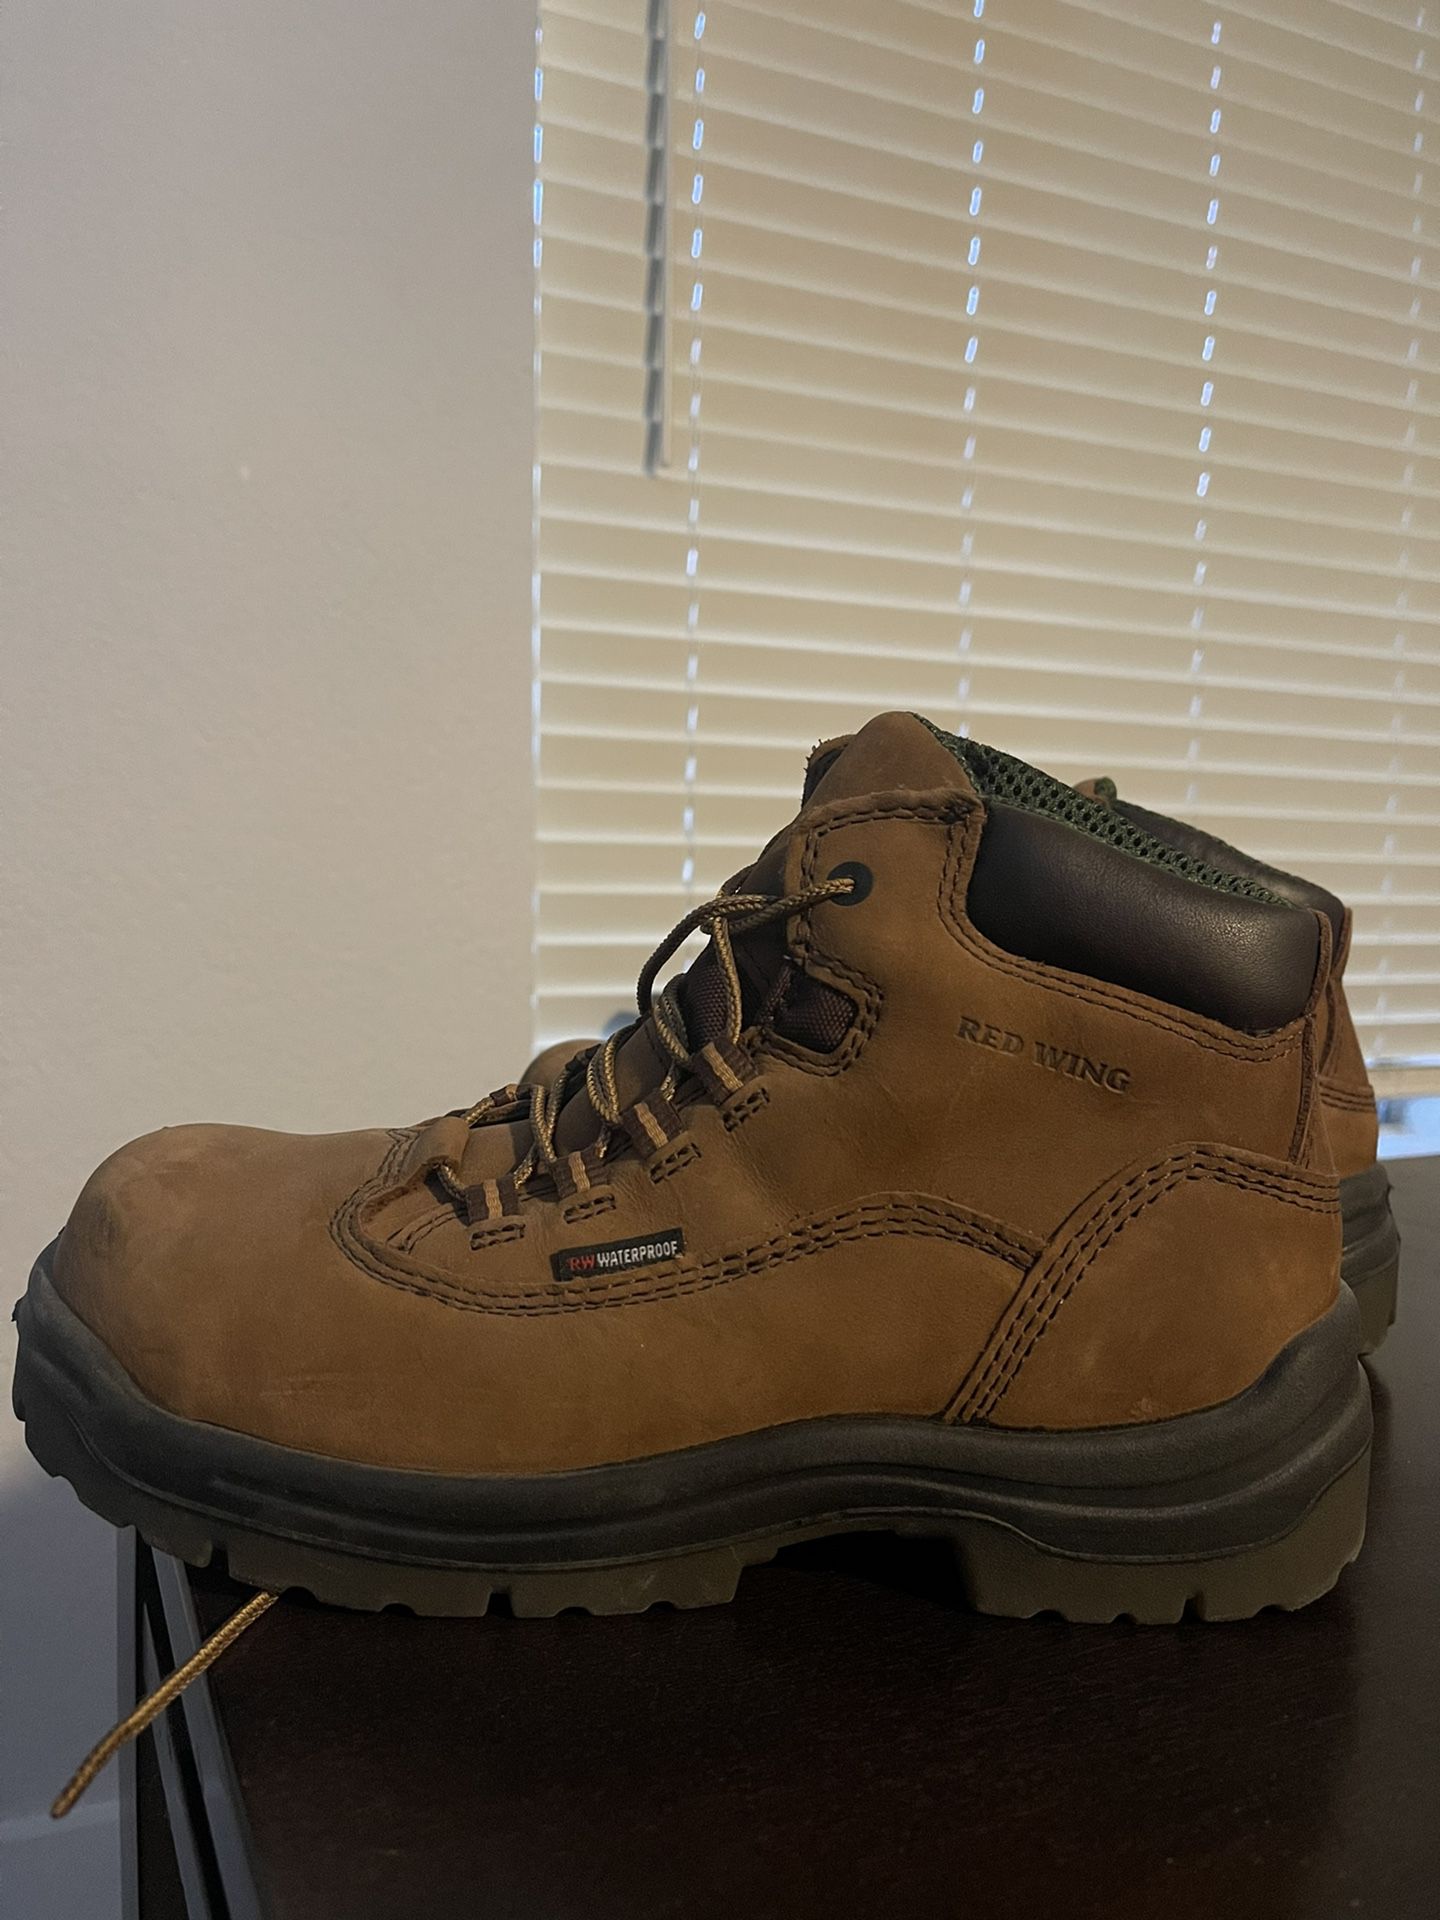 Womens Red Wing Steel Toe Work Boots